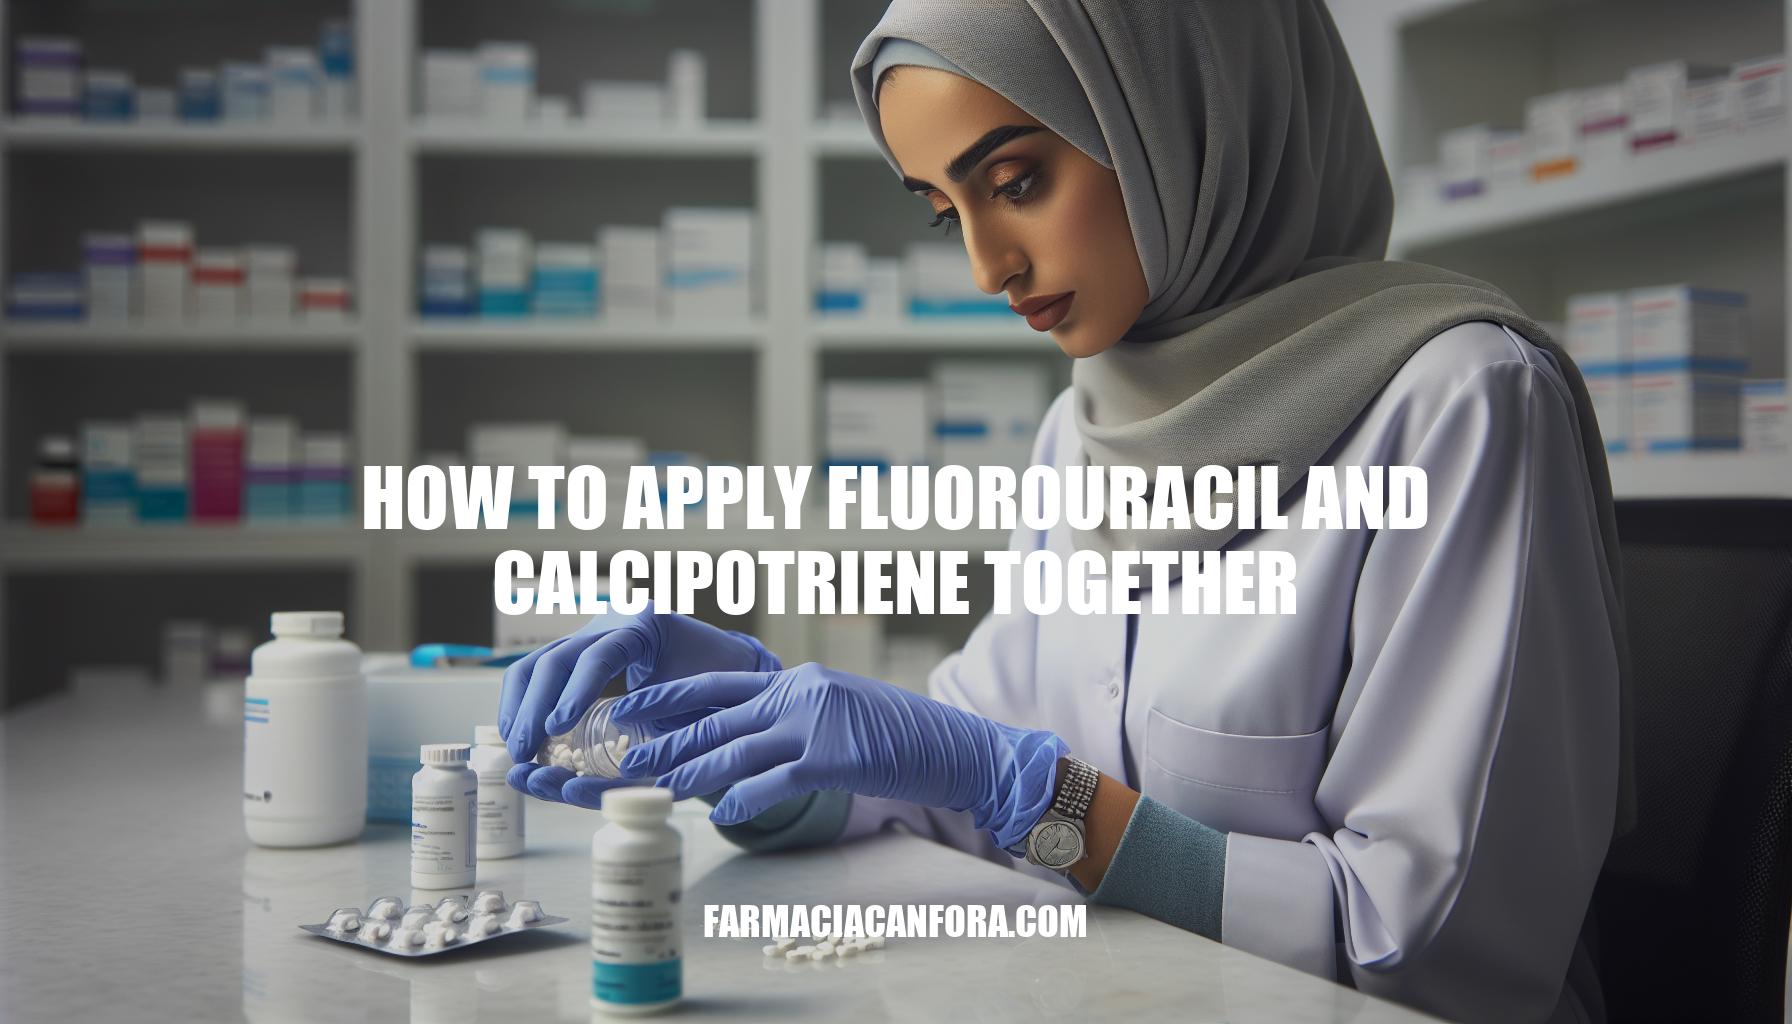 How to Apply Fluorouracil and Calcipotriene Together